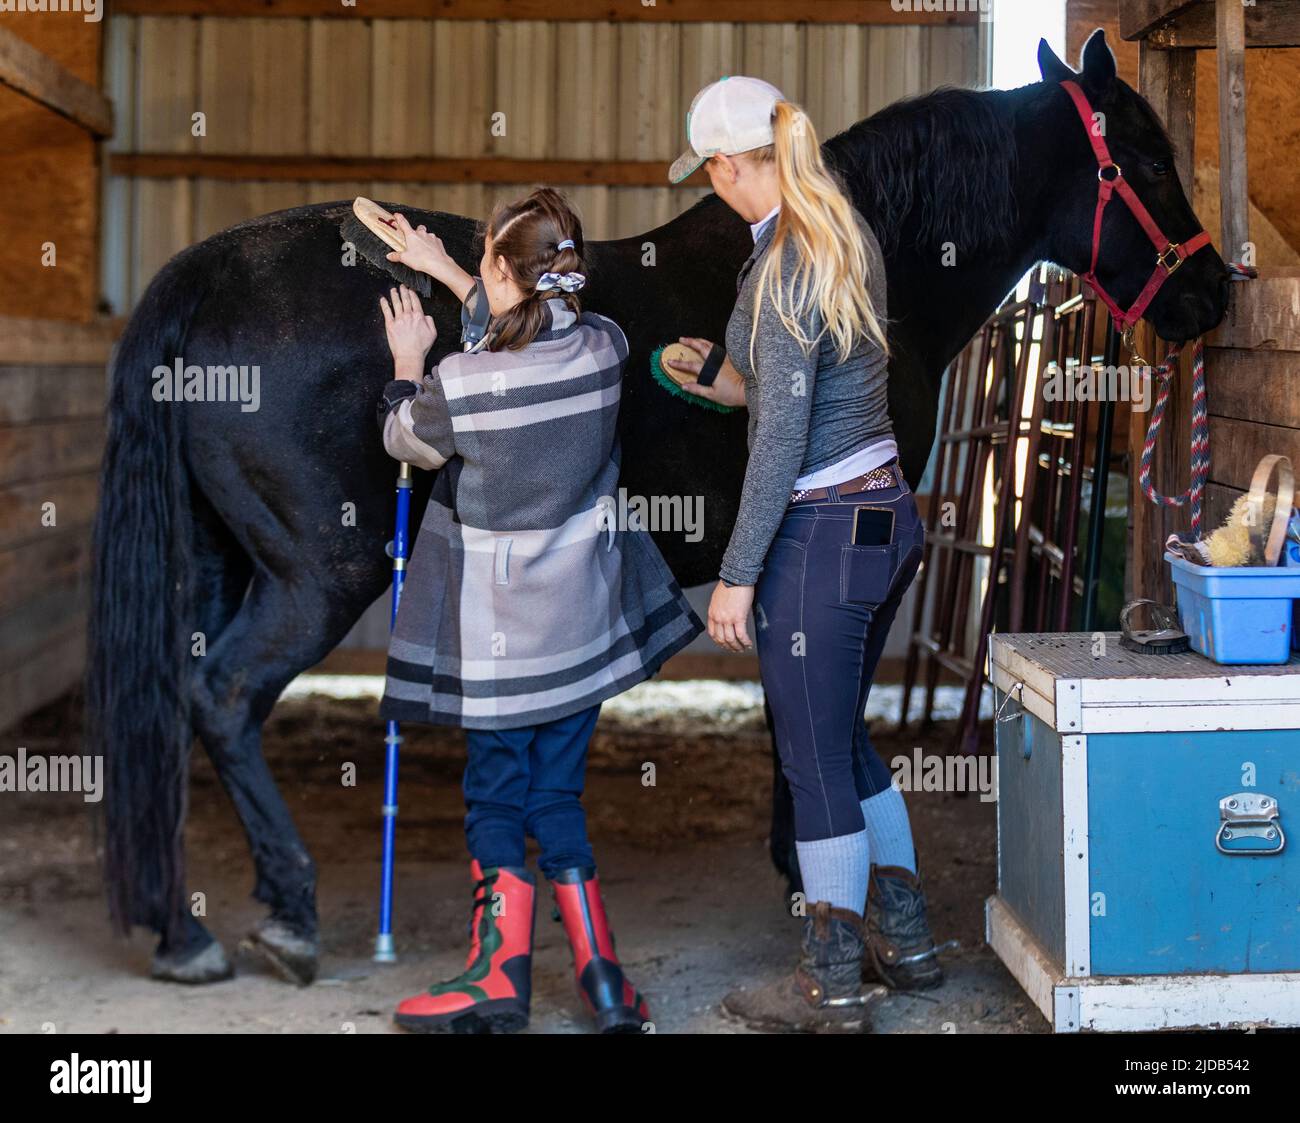 A trainer grooming a horse with a young girl with Cerebral Palsy during a Hippotherapy session; Westlock, Alberta, Canada Stock Photo